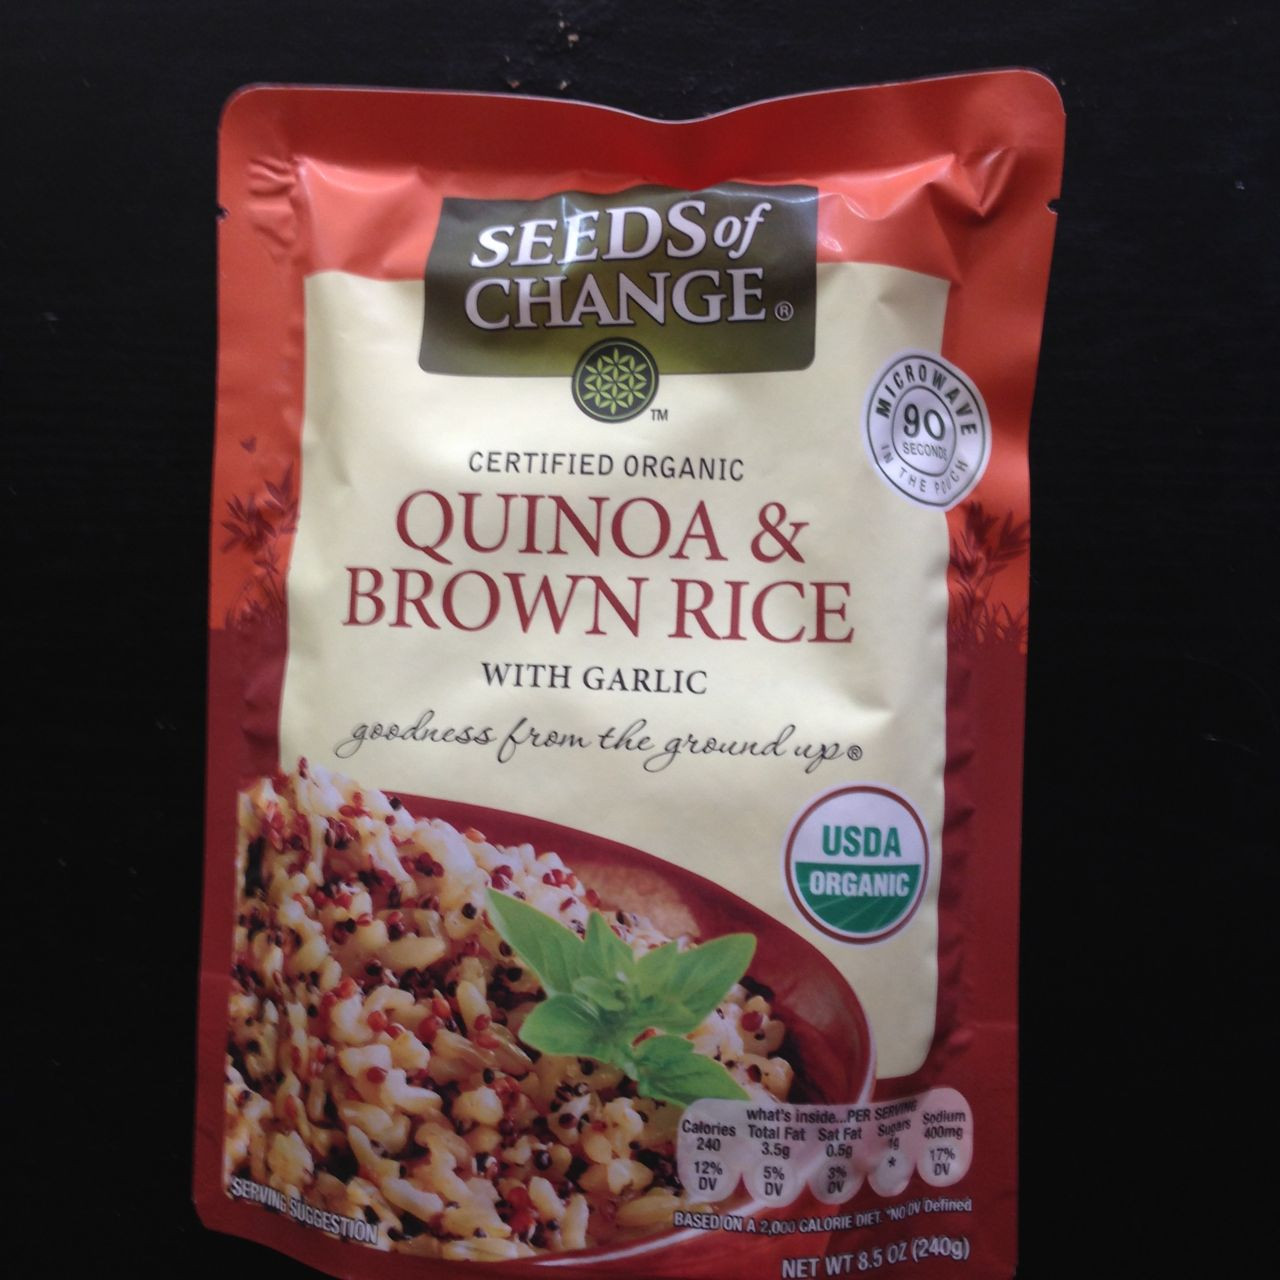 Seeds Of Change Quinoa And Brown Rice
 Seeds of Change quinoa & brown rice free with mailed